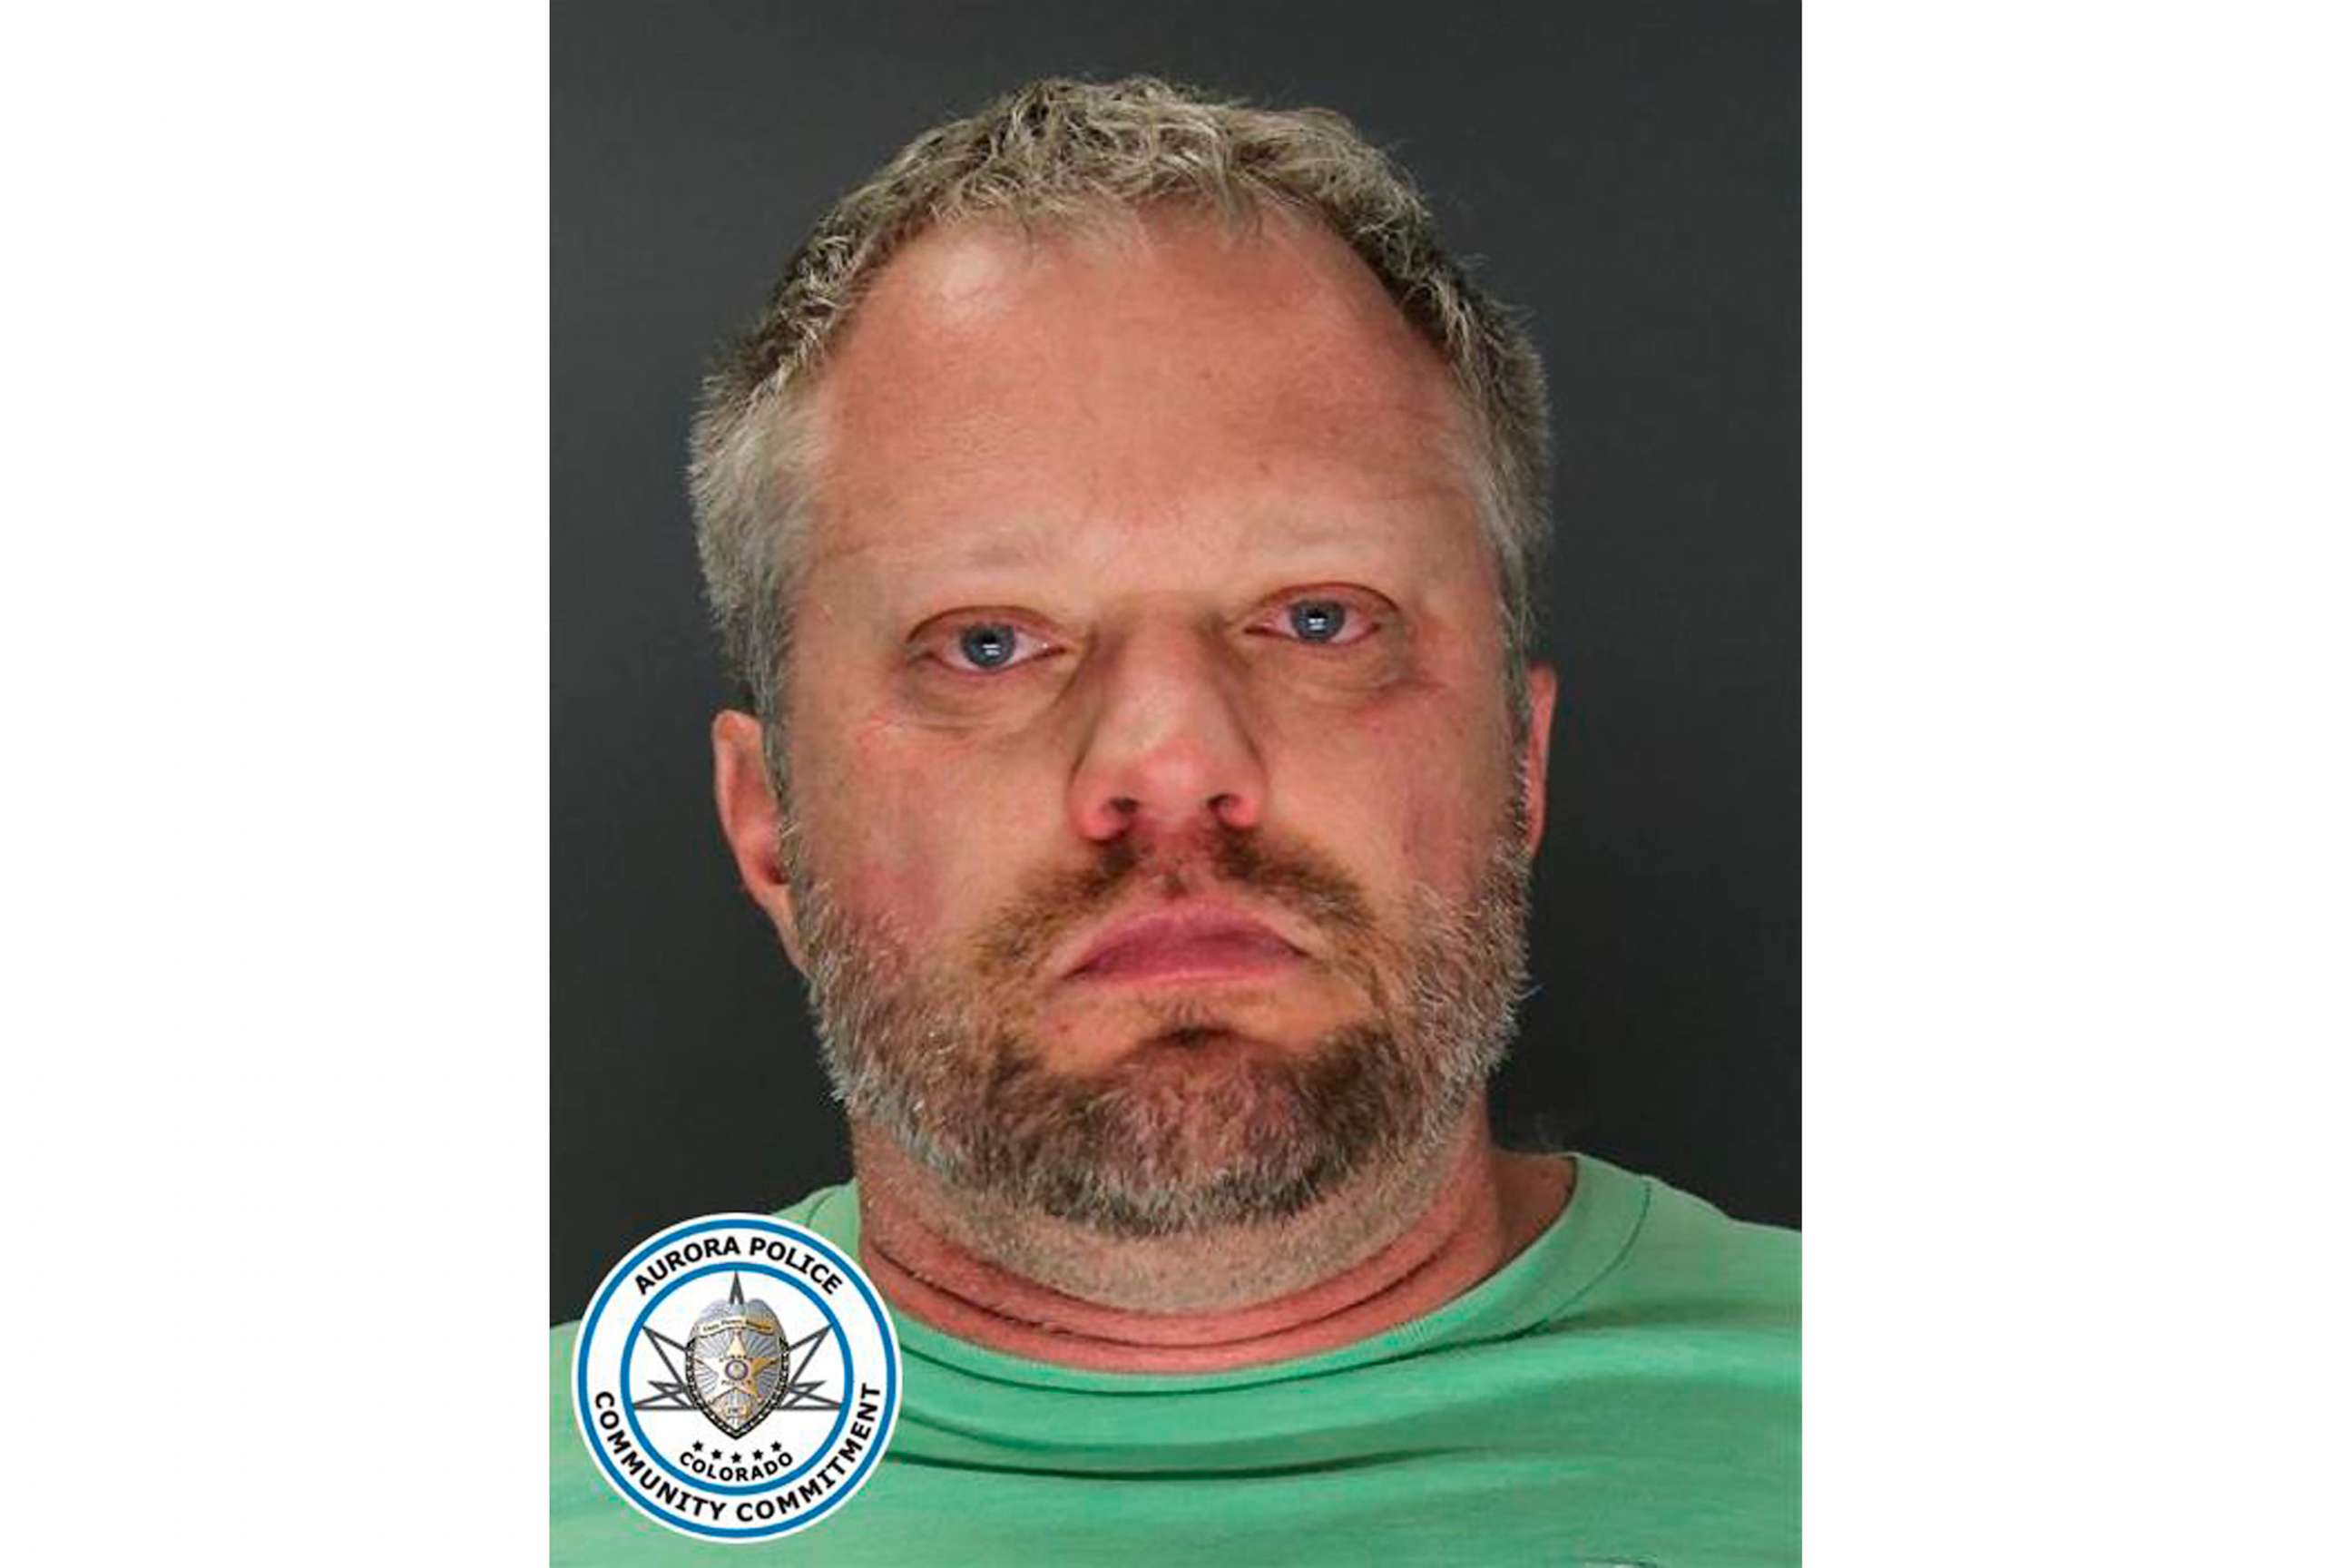 PHOTO: This undated photo provided by the Aurora Police Department shows James Toliver Craig, of Aurora, Colorado, who was arrested on a first-degree murder charge on March 19, 2023.